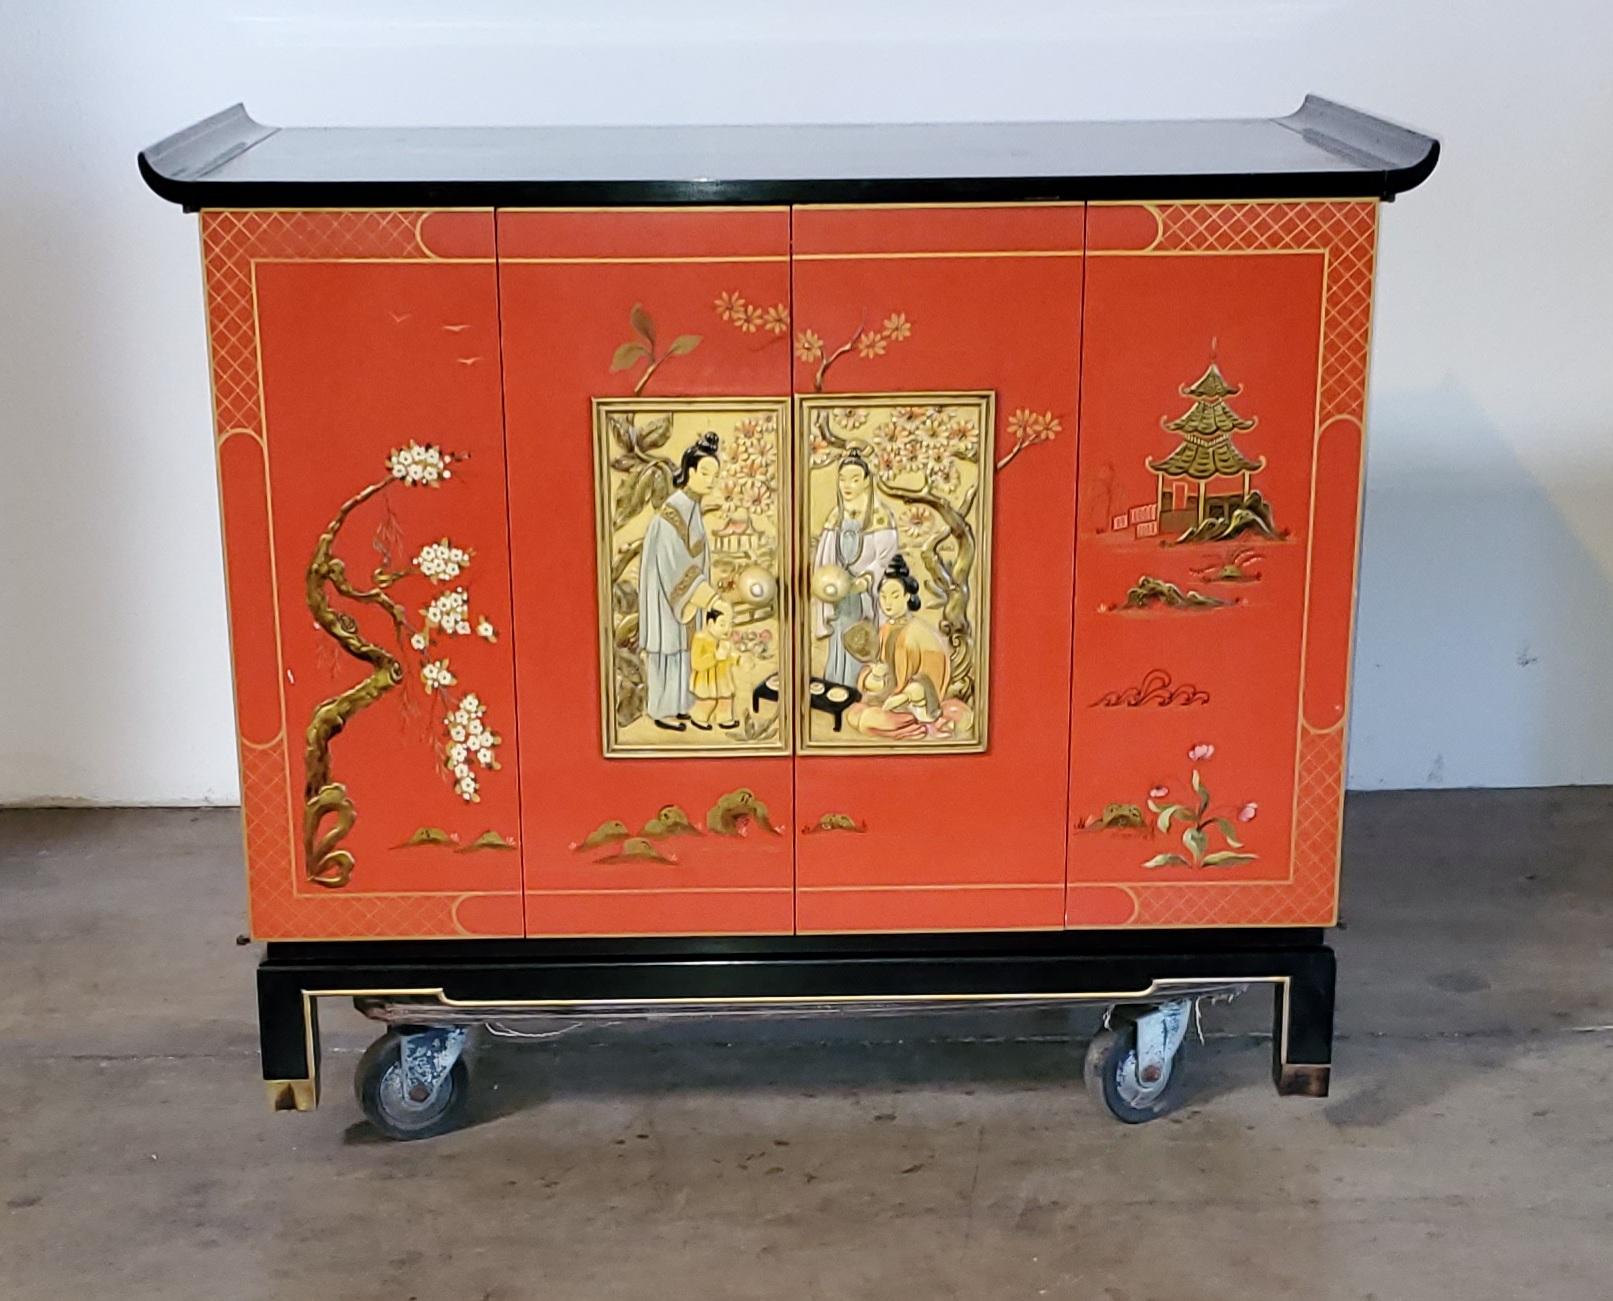 Vintage Asian Modern Oriental cabinet with vintage 1960s Zenith Colored TV.

This Vintage Asian Modern Cabinet Has An Ornate Oriental Design.

The Oriental Motif On The Front Doors Is A Beautiful Asian Relief Design.

The Oriental Black